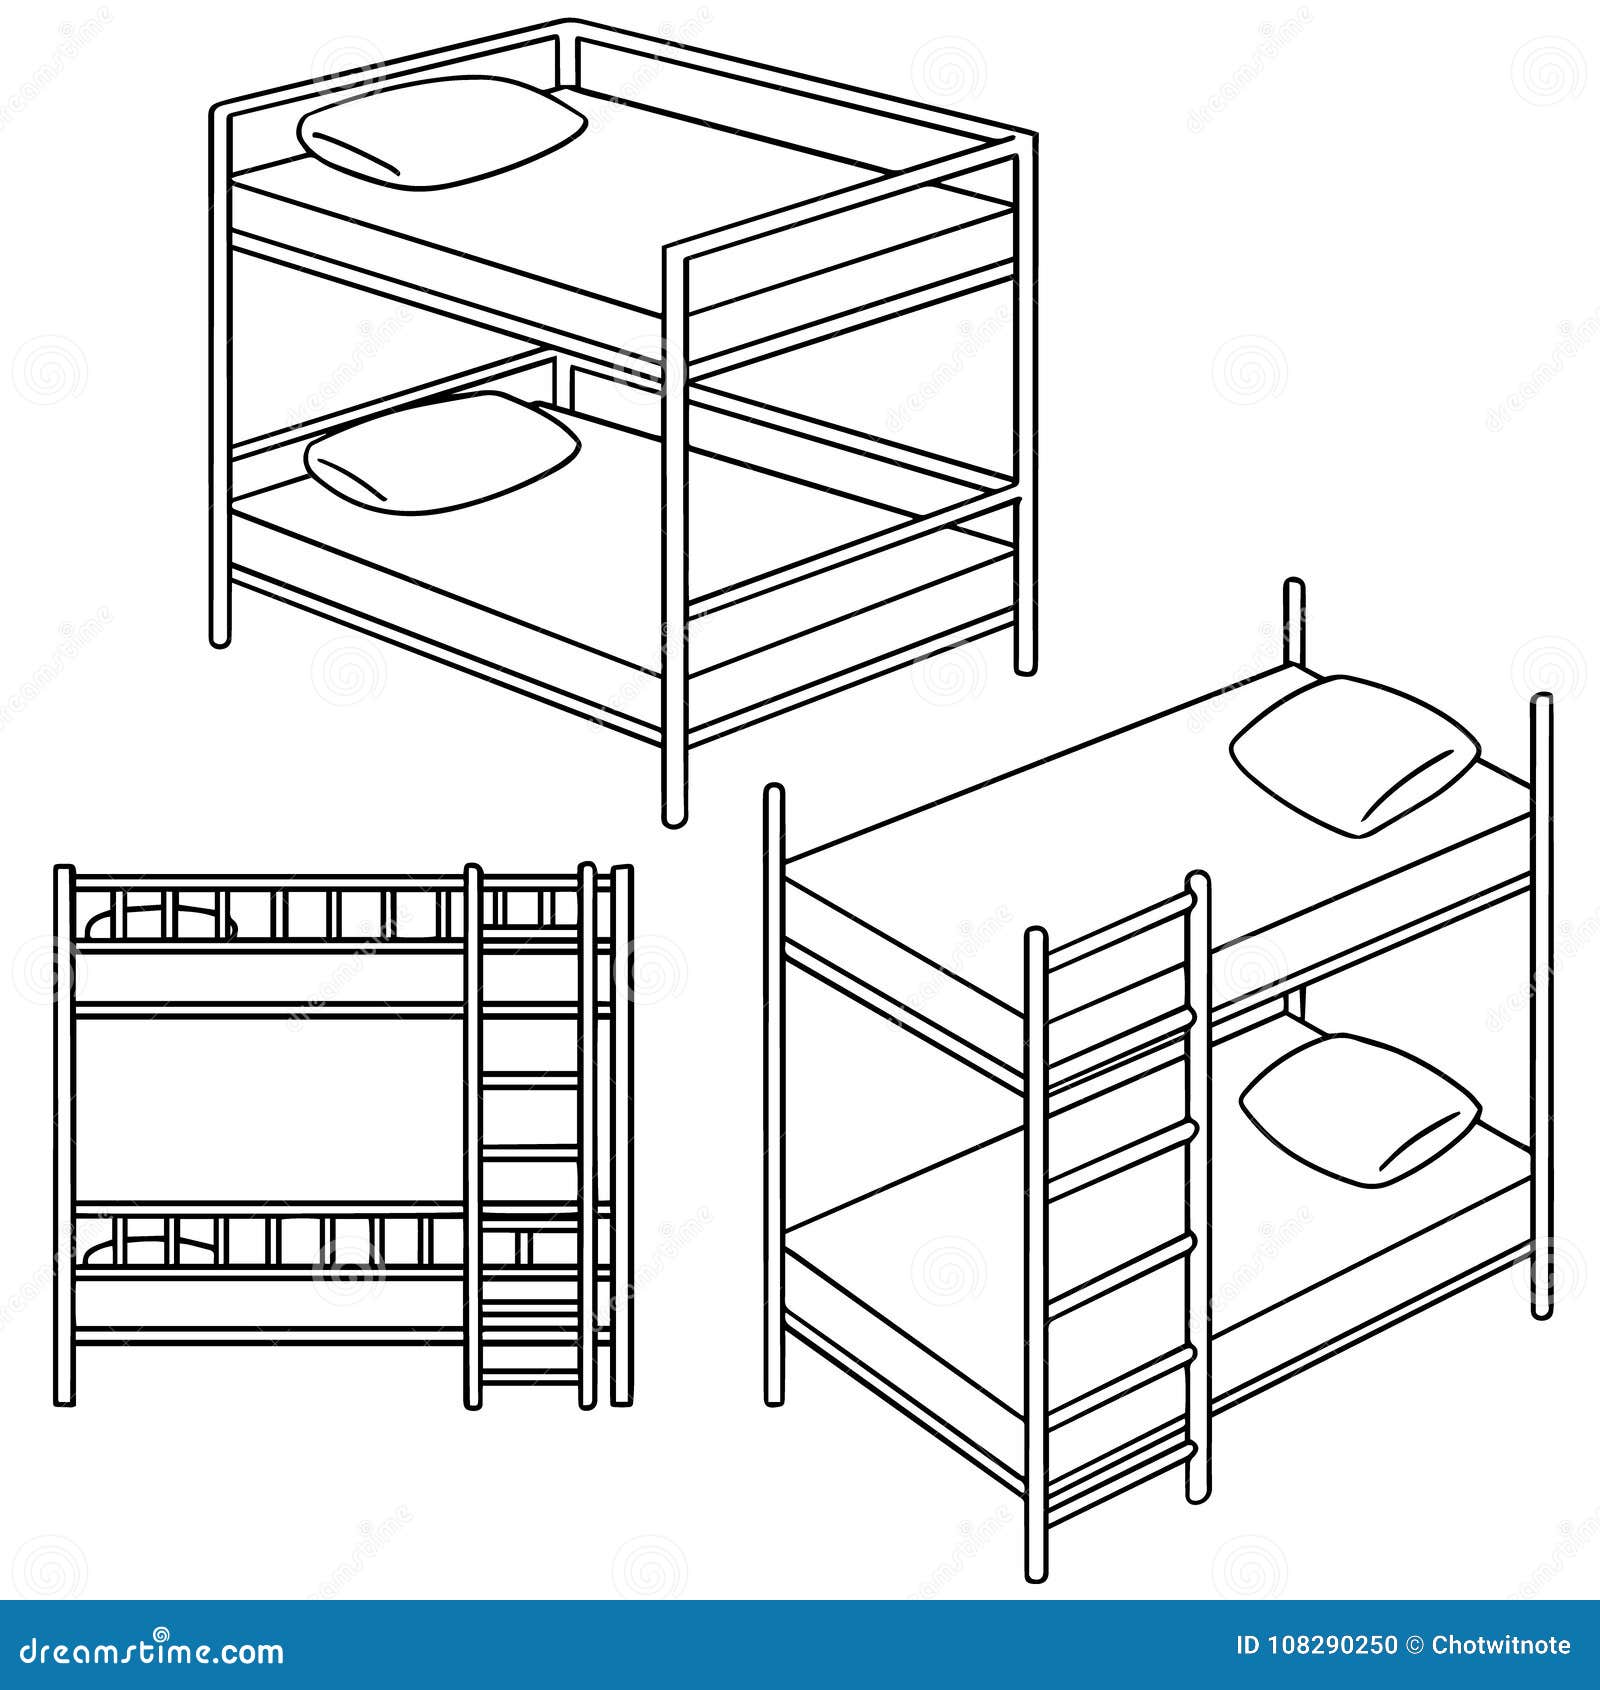 Premium Vector  Childrens room childrens furniture bunk bed table and  two chairs hand drawn vector illustration of a sketch style